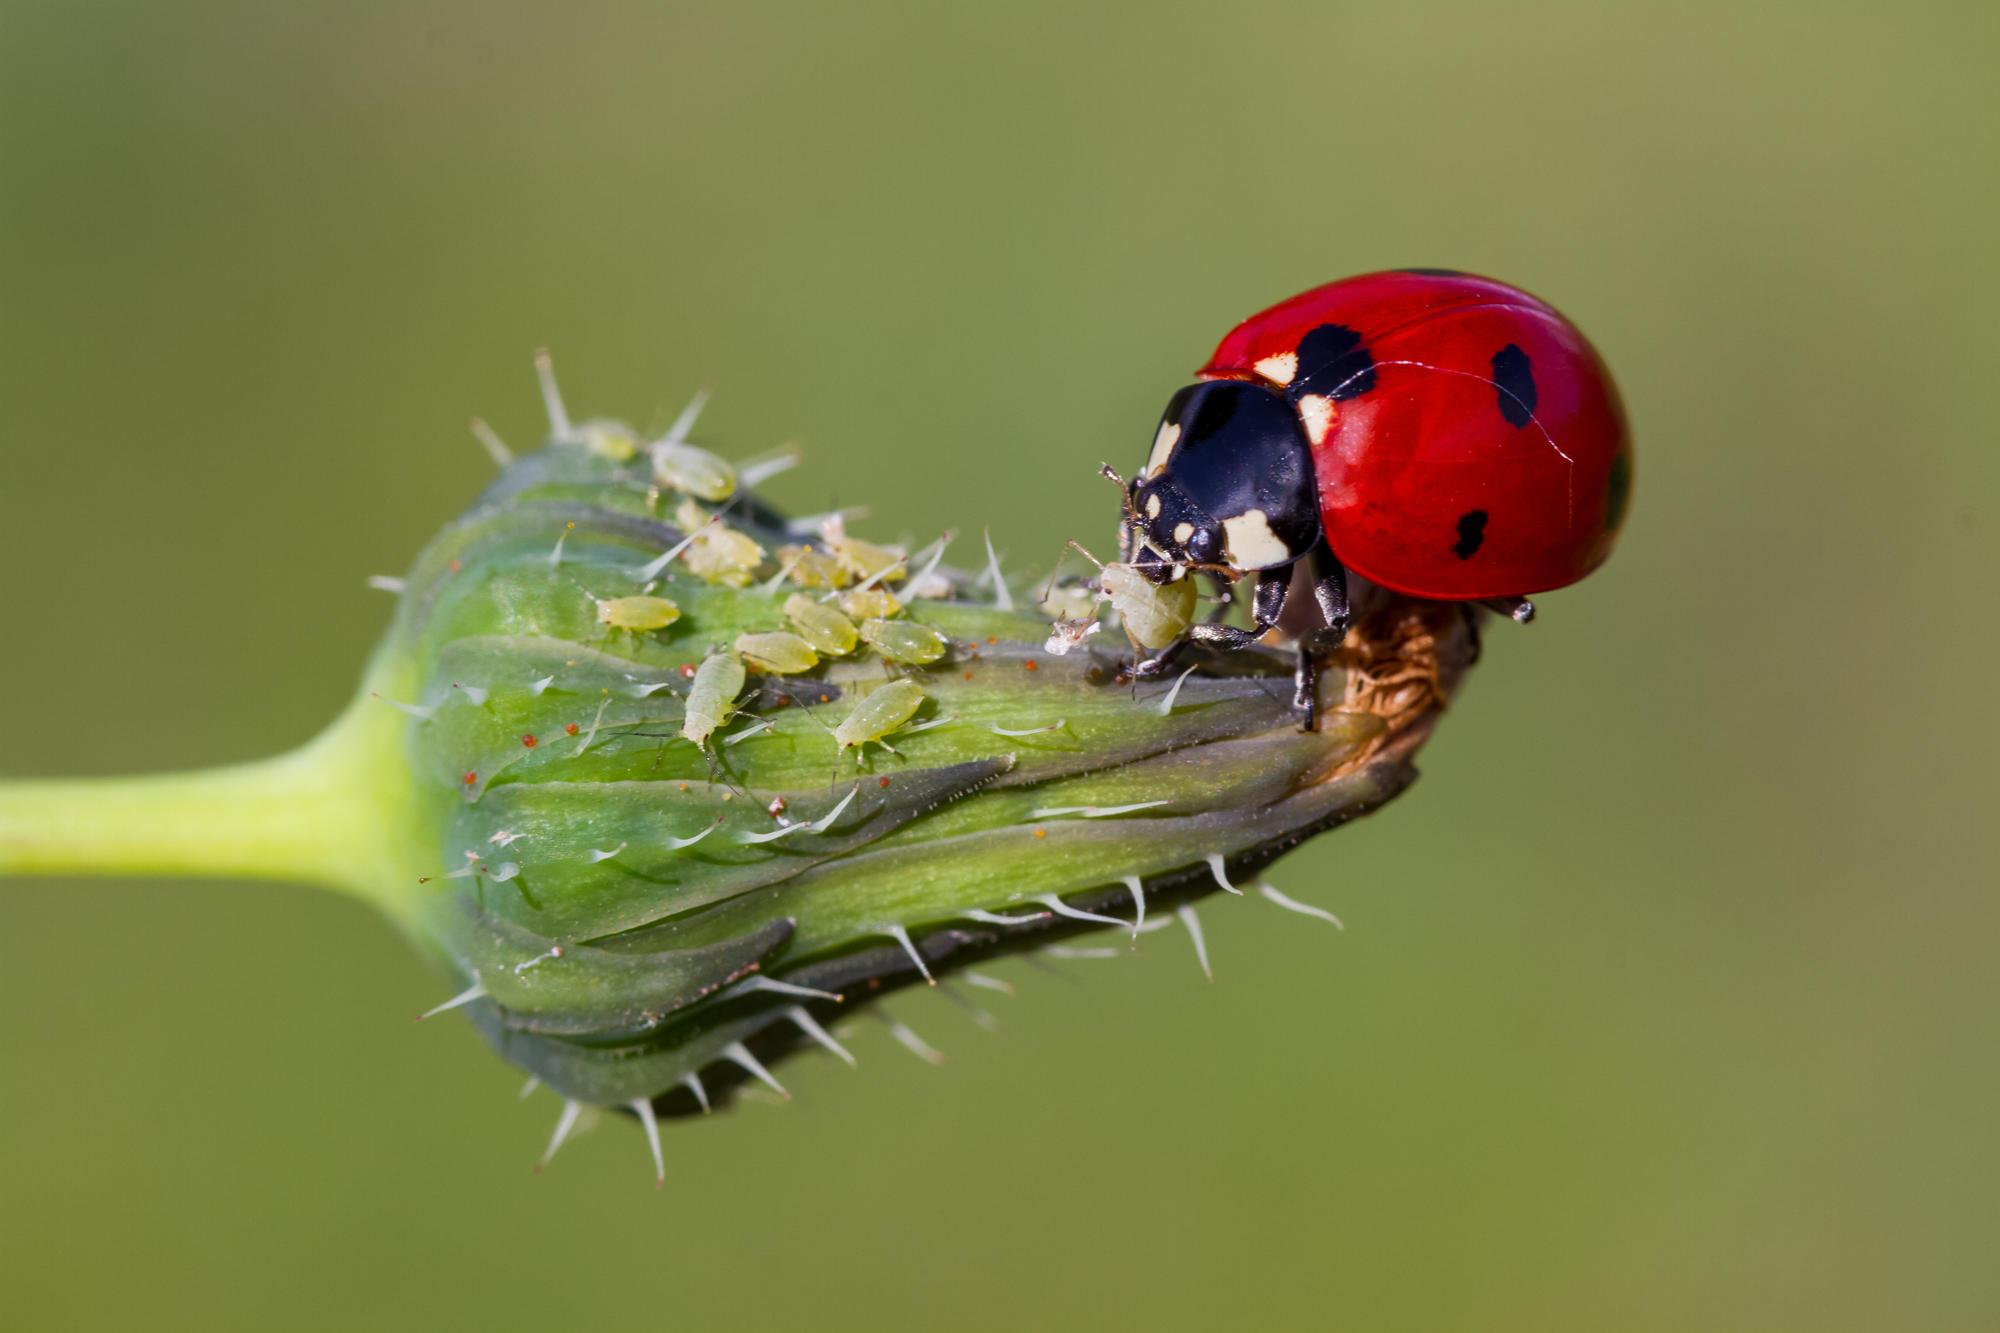 A ladybug eating aphids on a plant.